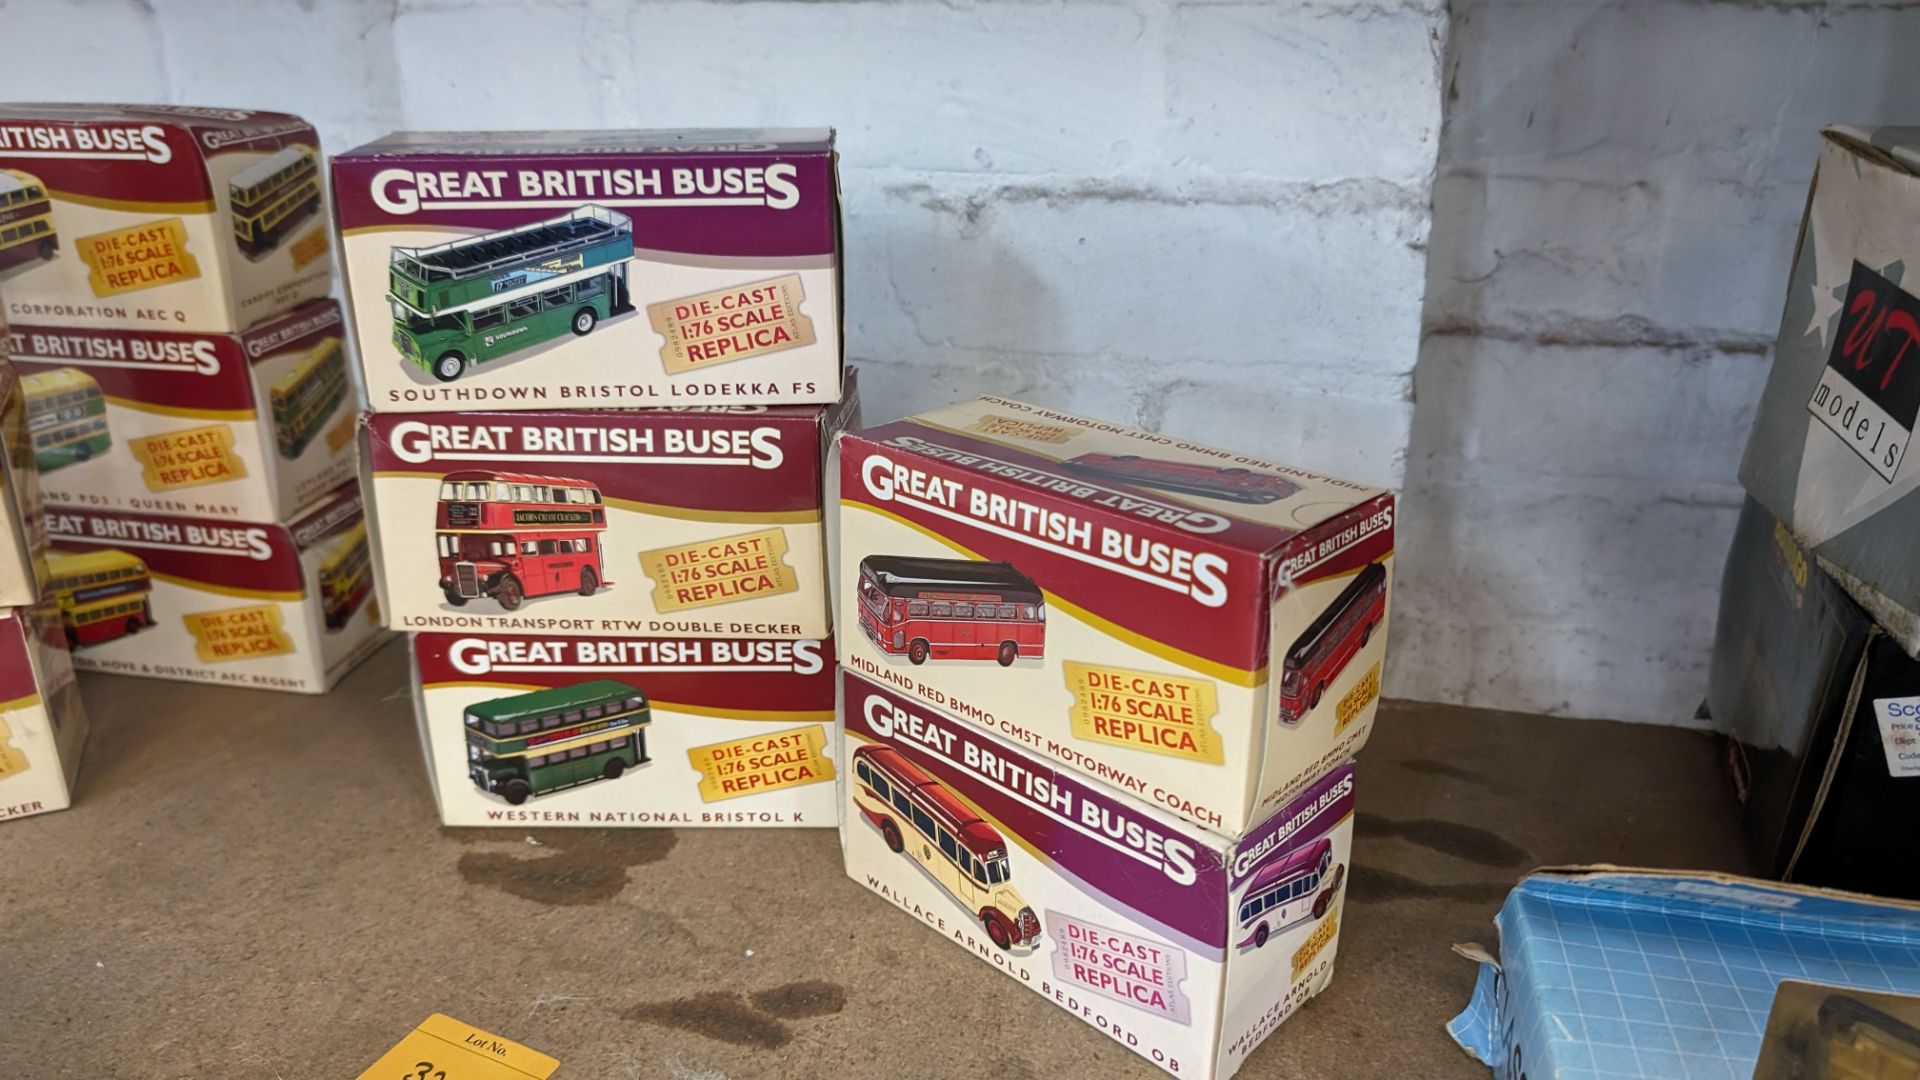 5 assorted Great British Buses die-cast replica buses, 1:76 scale - Image 8 of 9